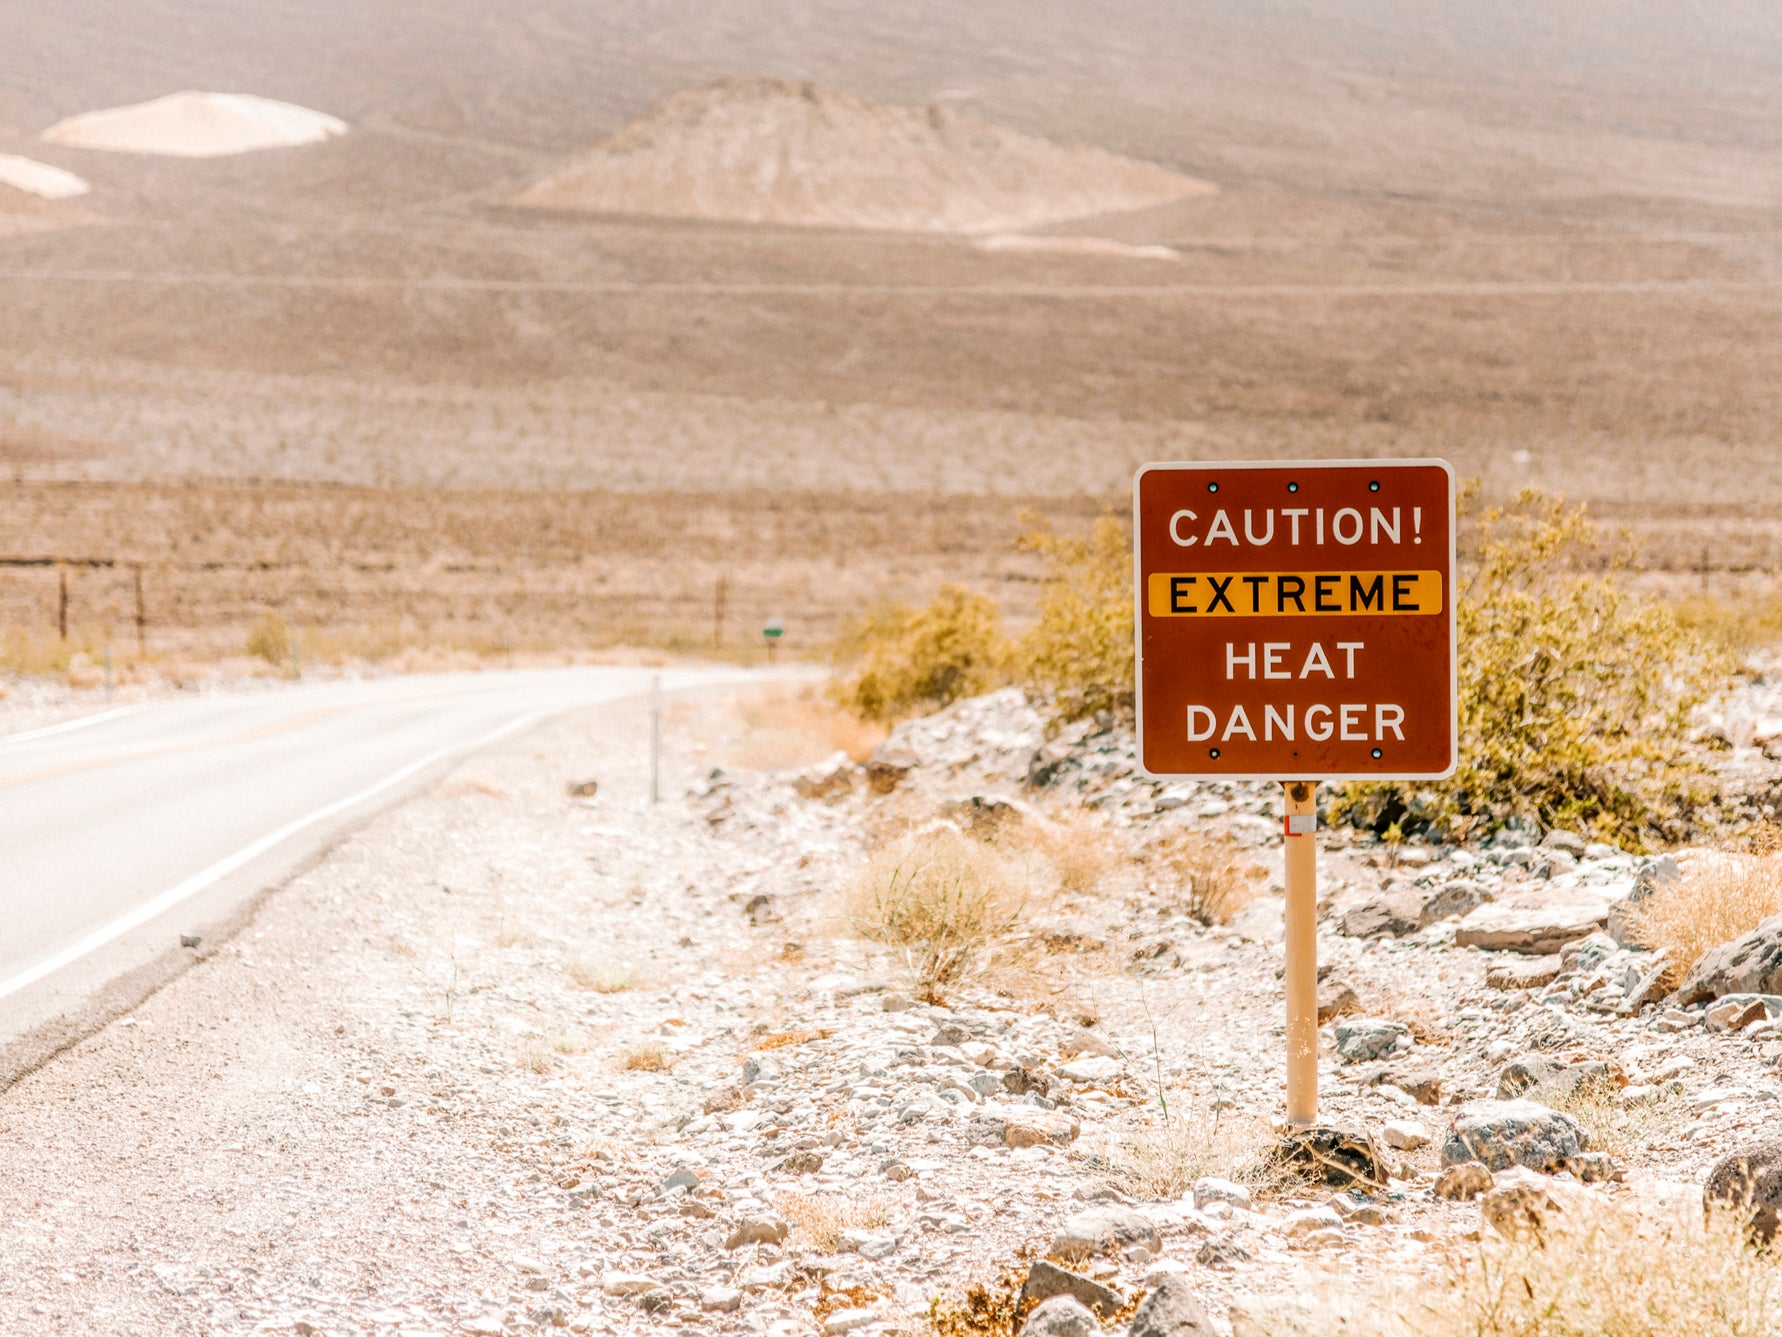 An extreme heat warning in Death Valley National Park